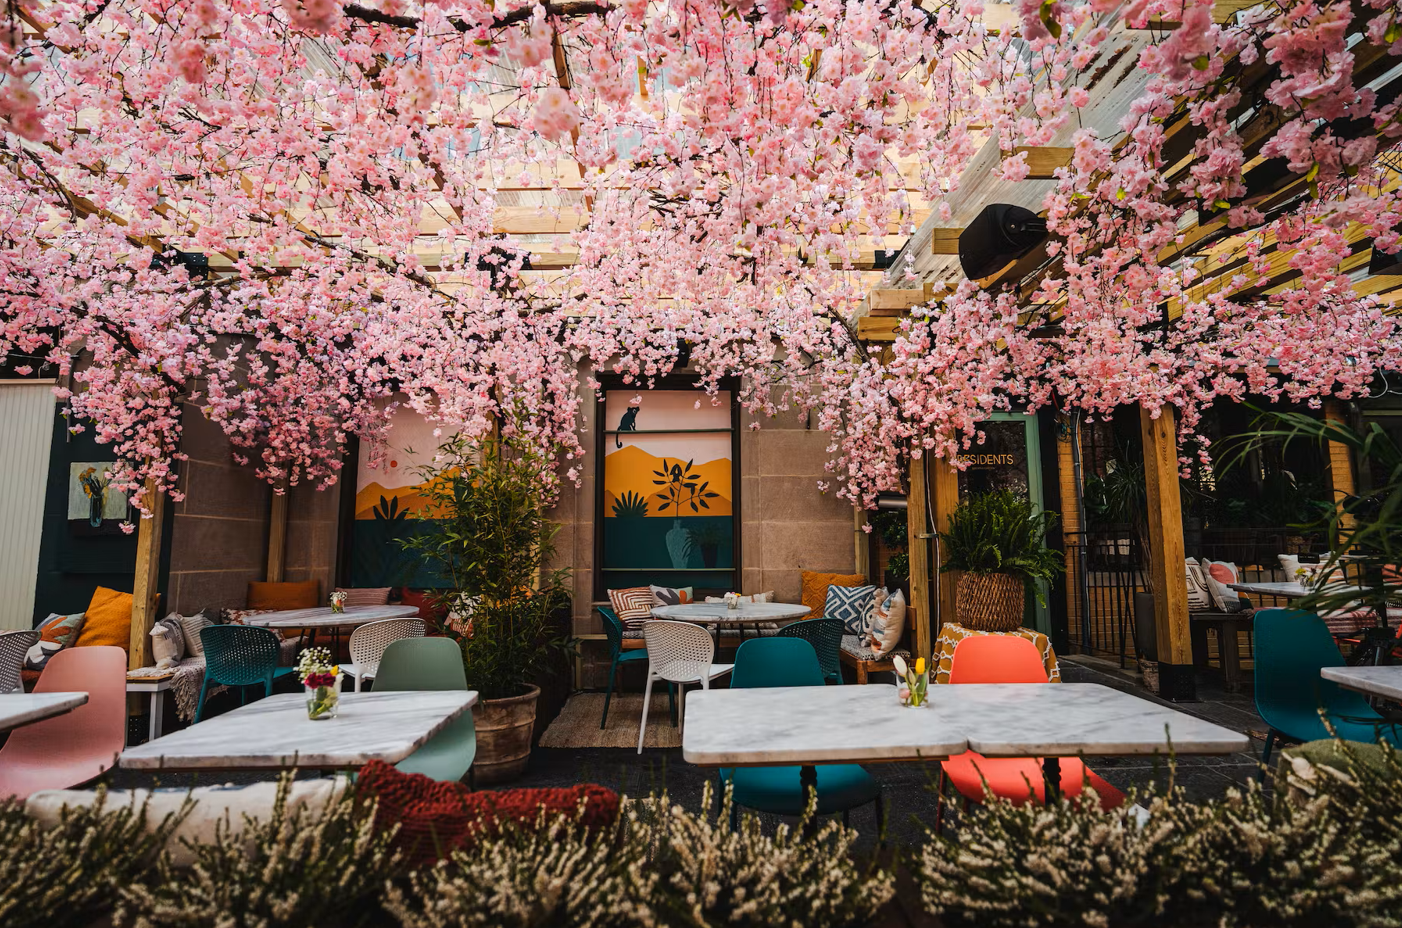 An outdoor bar patio decorated for spring with cherry blossoms, white marble tables and multicolored chairs.